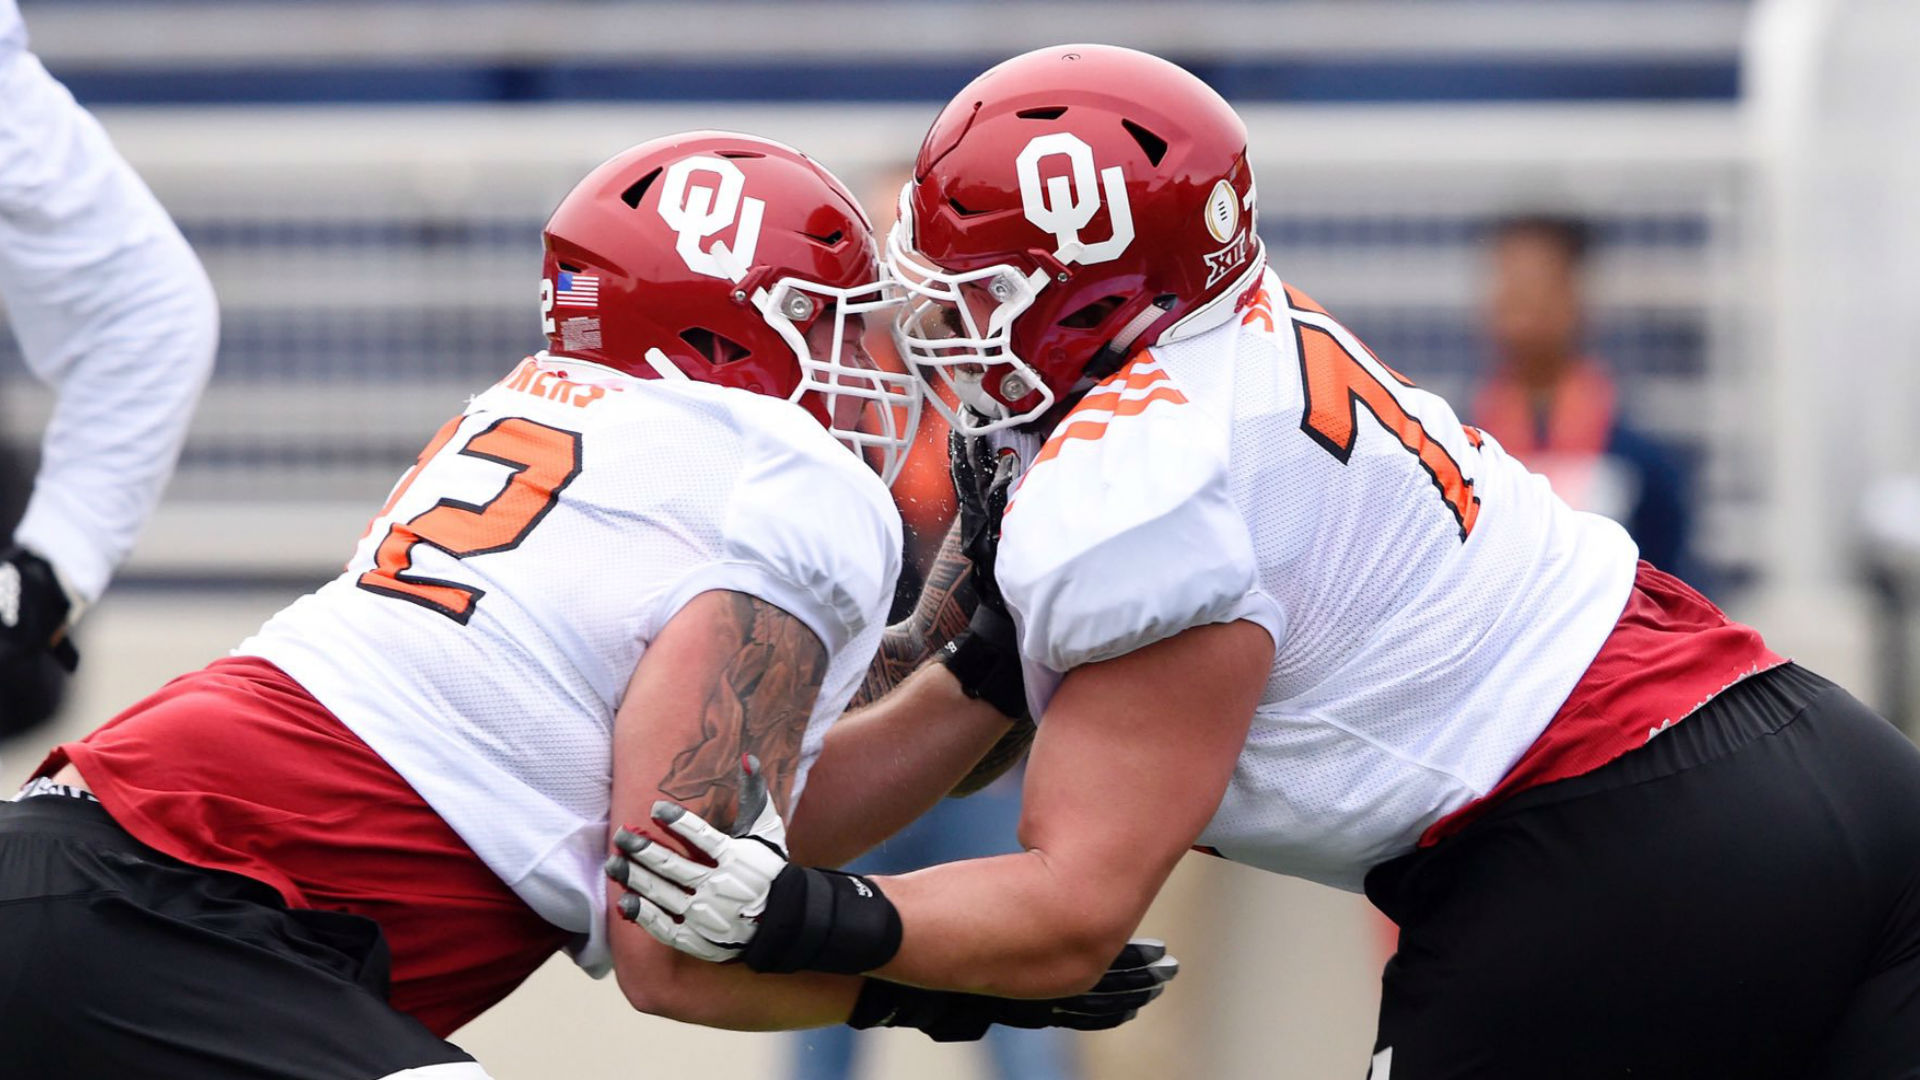 Oklahoma's O-Line provided protection for two successive Heisman Trophy winners, and next week four of its members will head to the NFL.